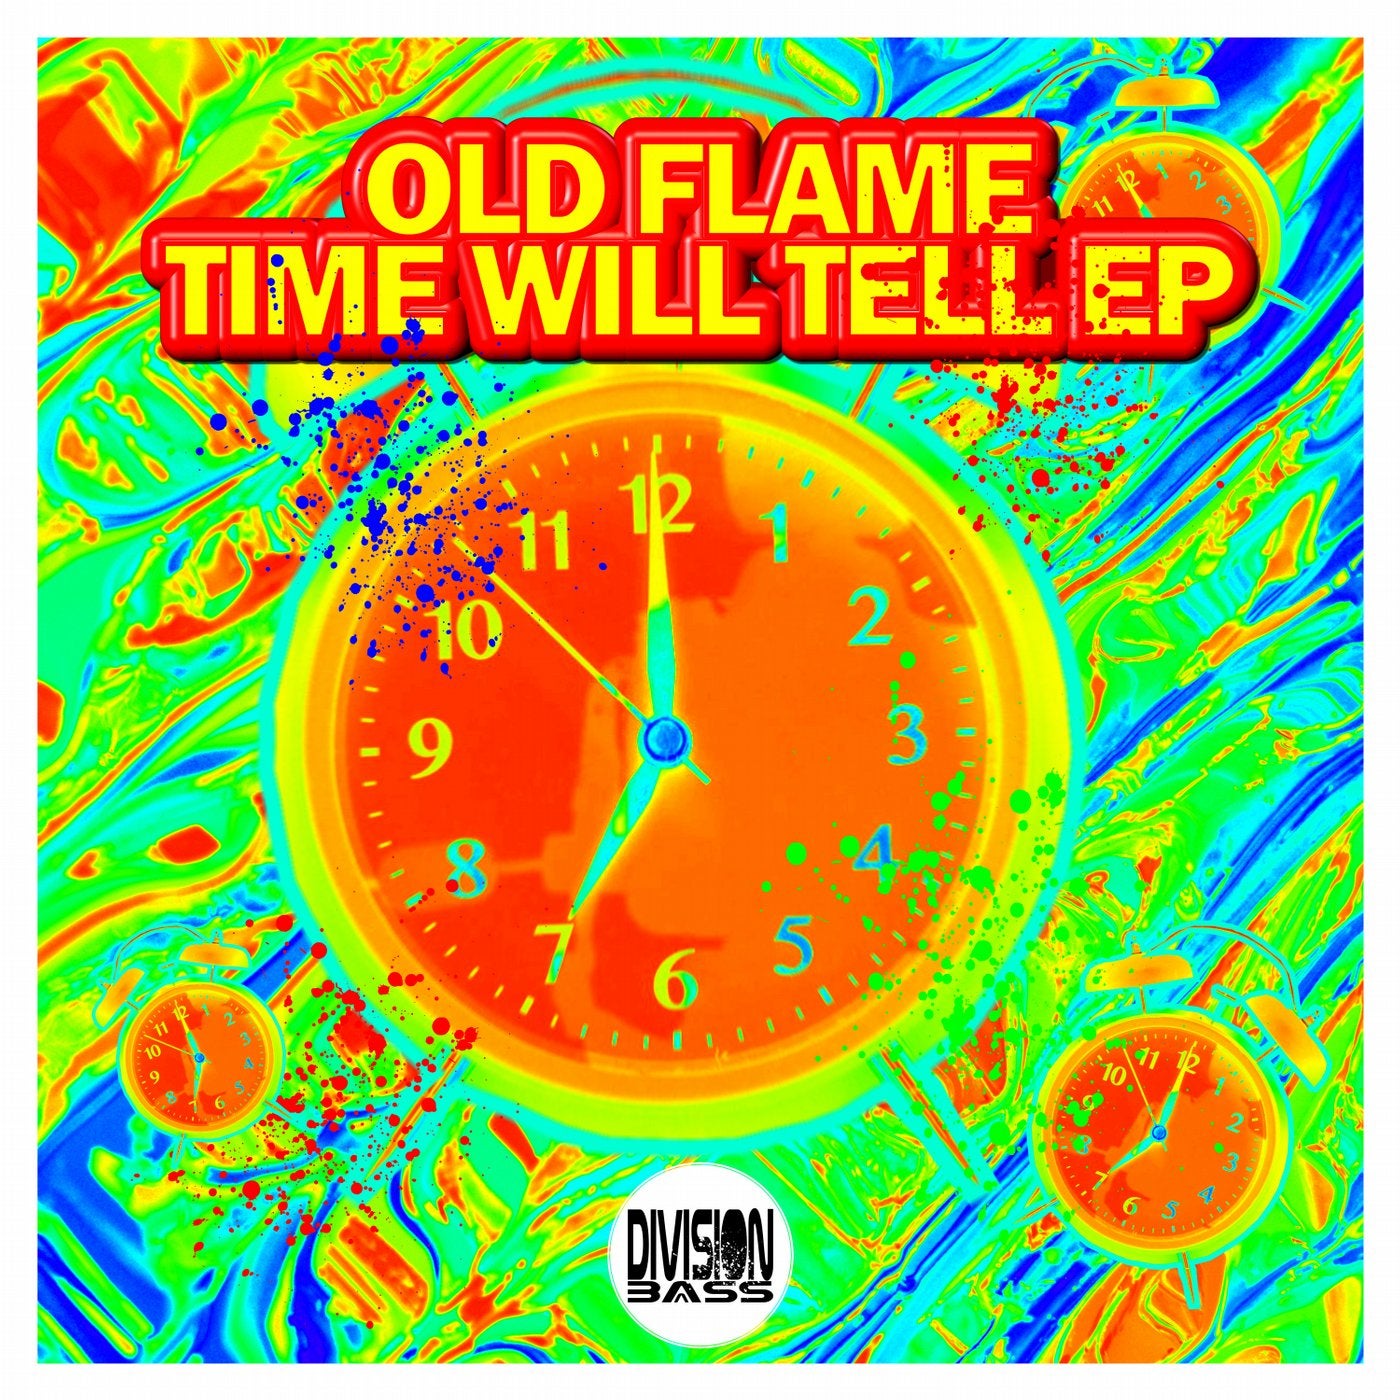 Time Will Tell EP